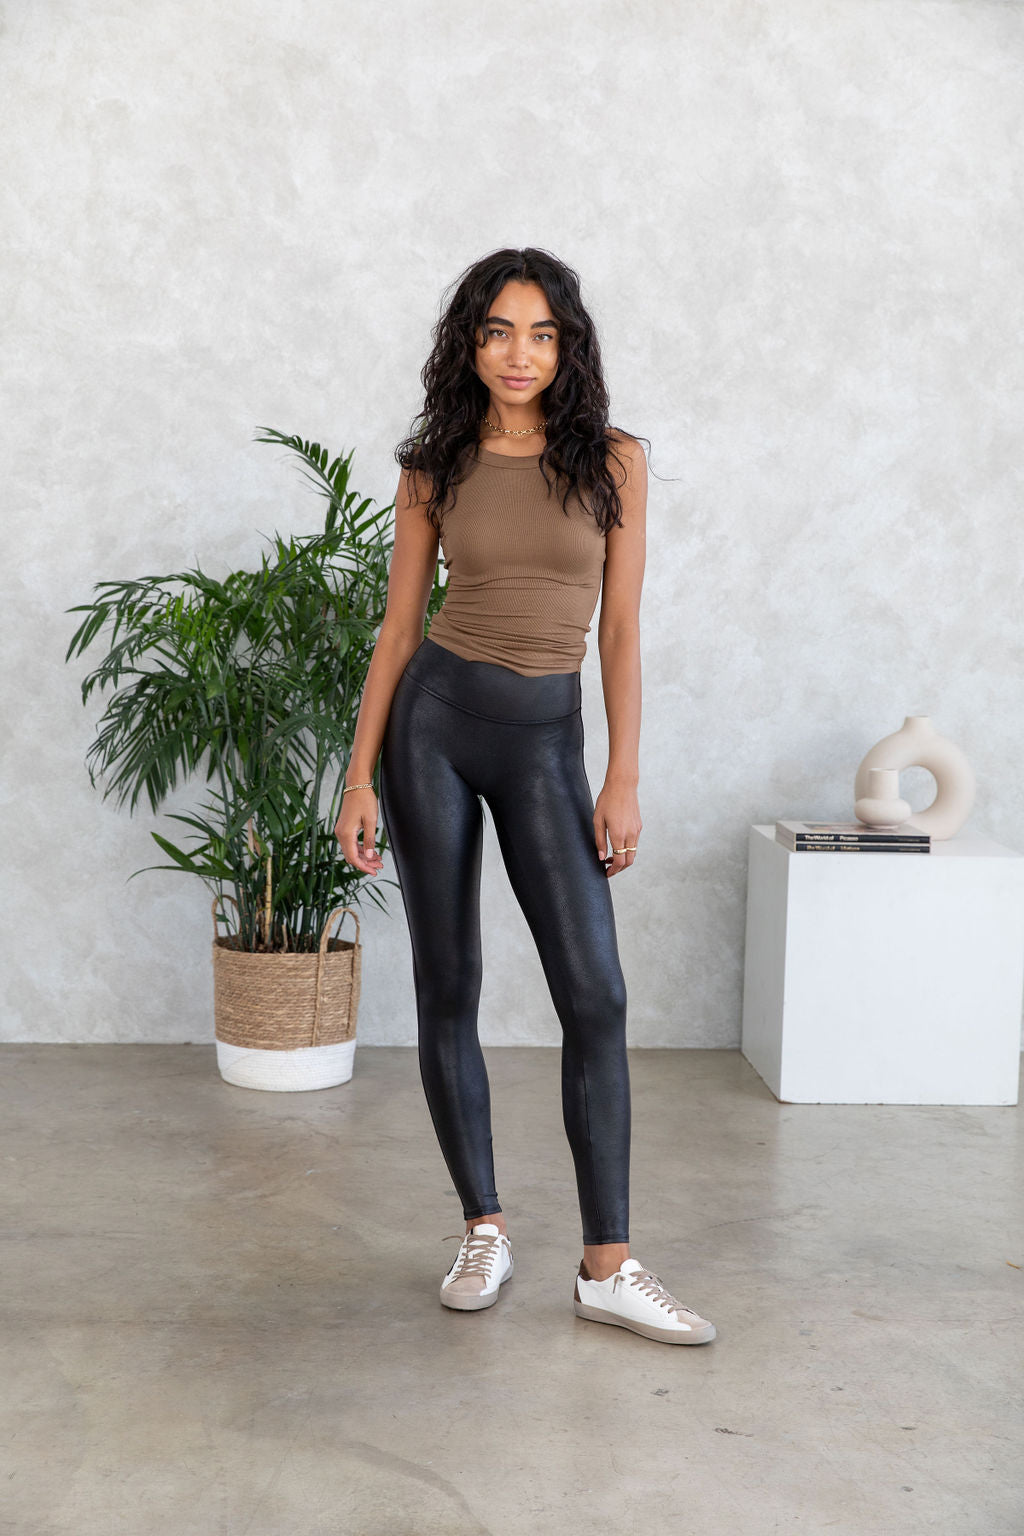 Spanx Faux Leather Leggings In Stock At UK Tights